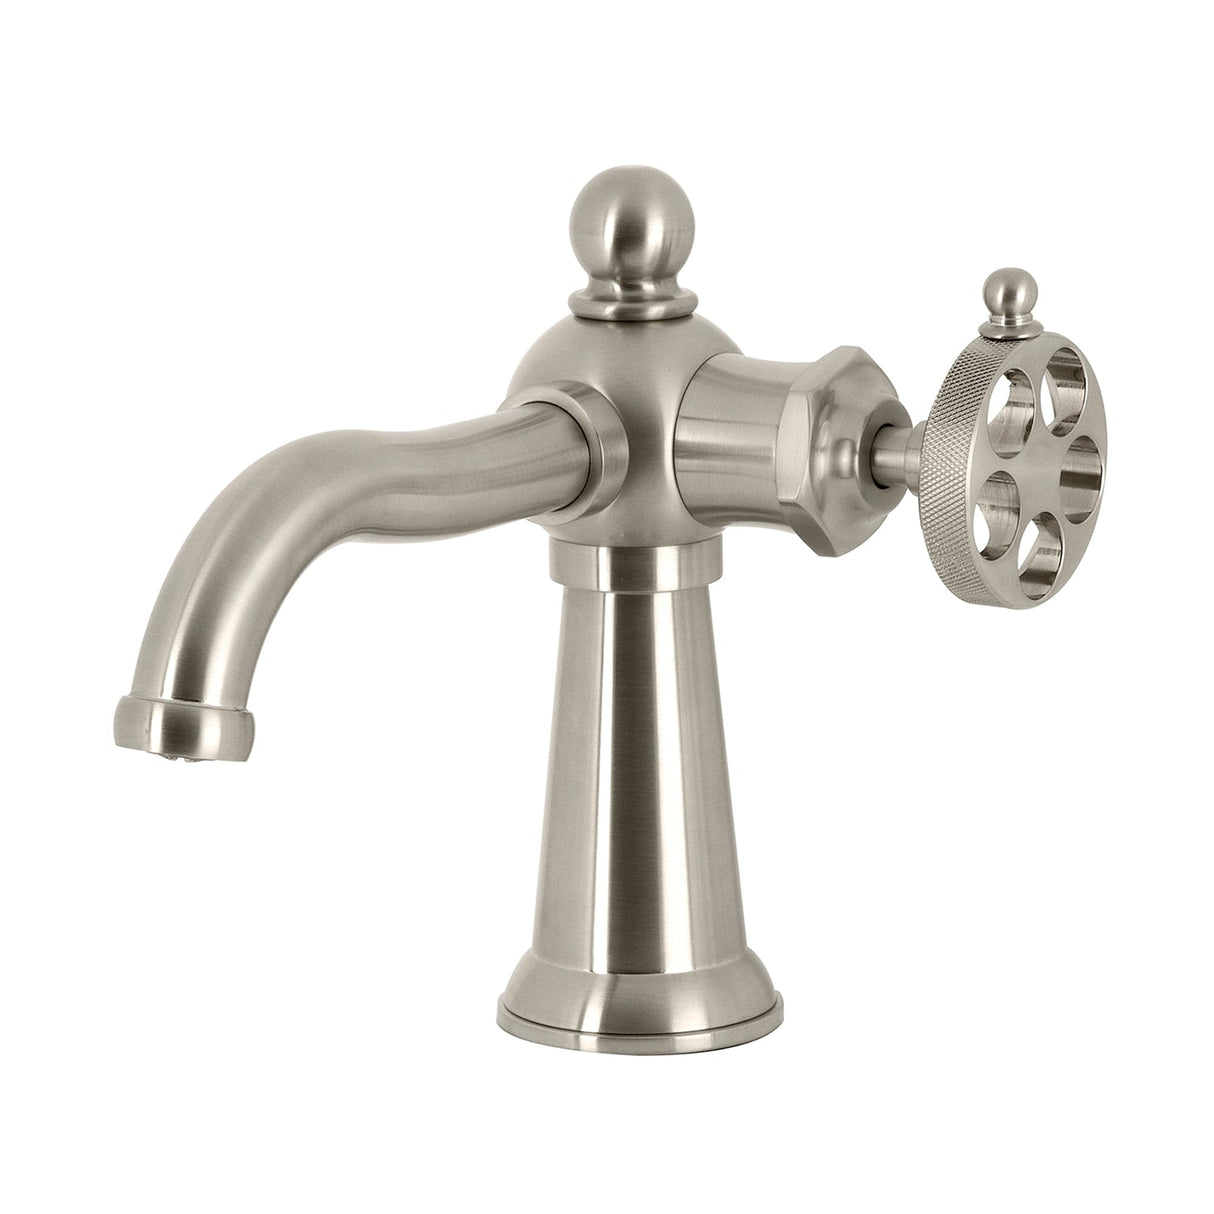 Wendell KS3548RKZ Single-Handle 1-Hole Deck Mount Bathroom Faucet with Knurled Handle and Push Pop-Up Drain, Brushed Nickel